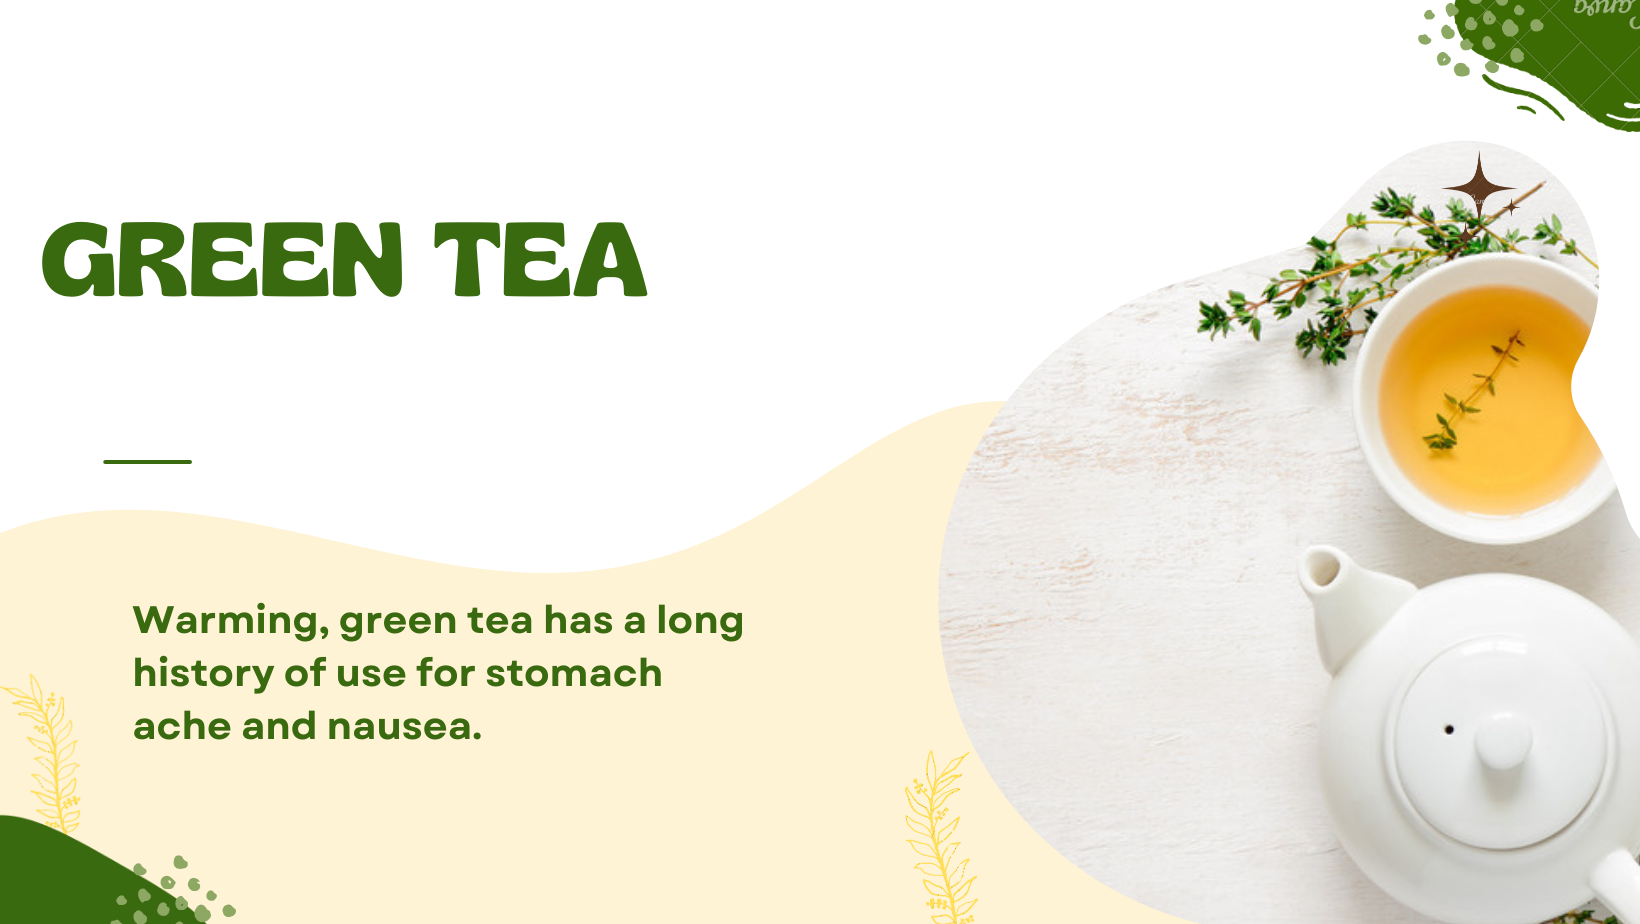 Sippin' on Green Tea Your Go-To Guide for a Healthy Lifestyle